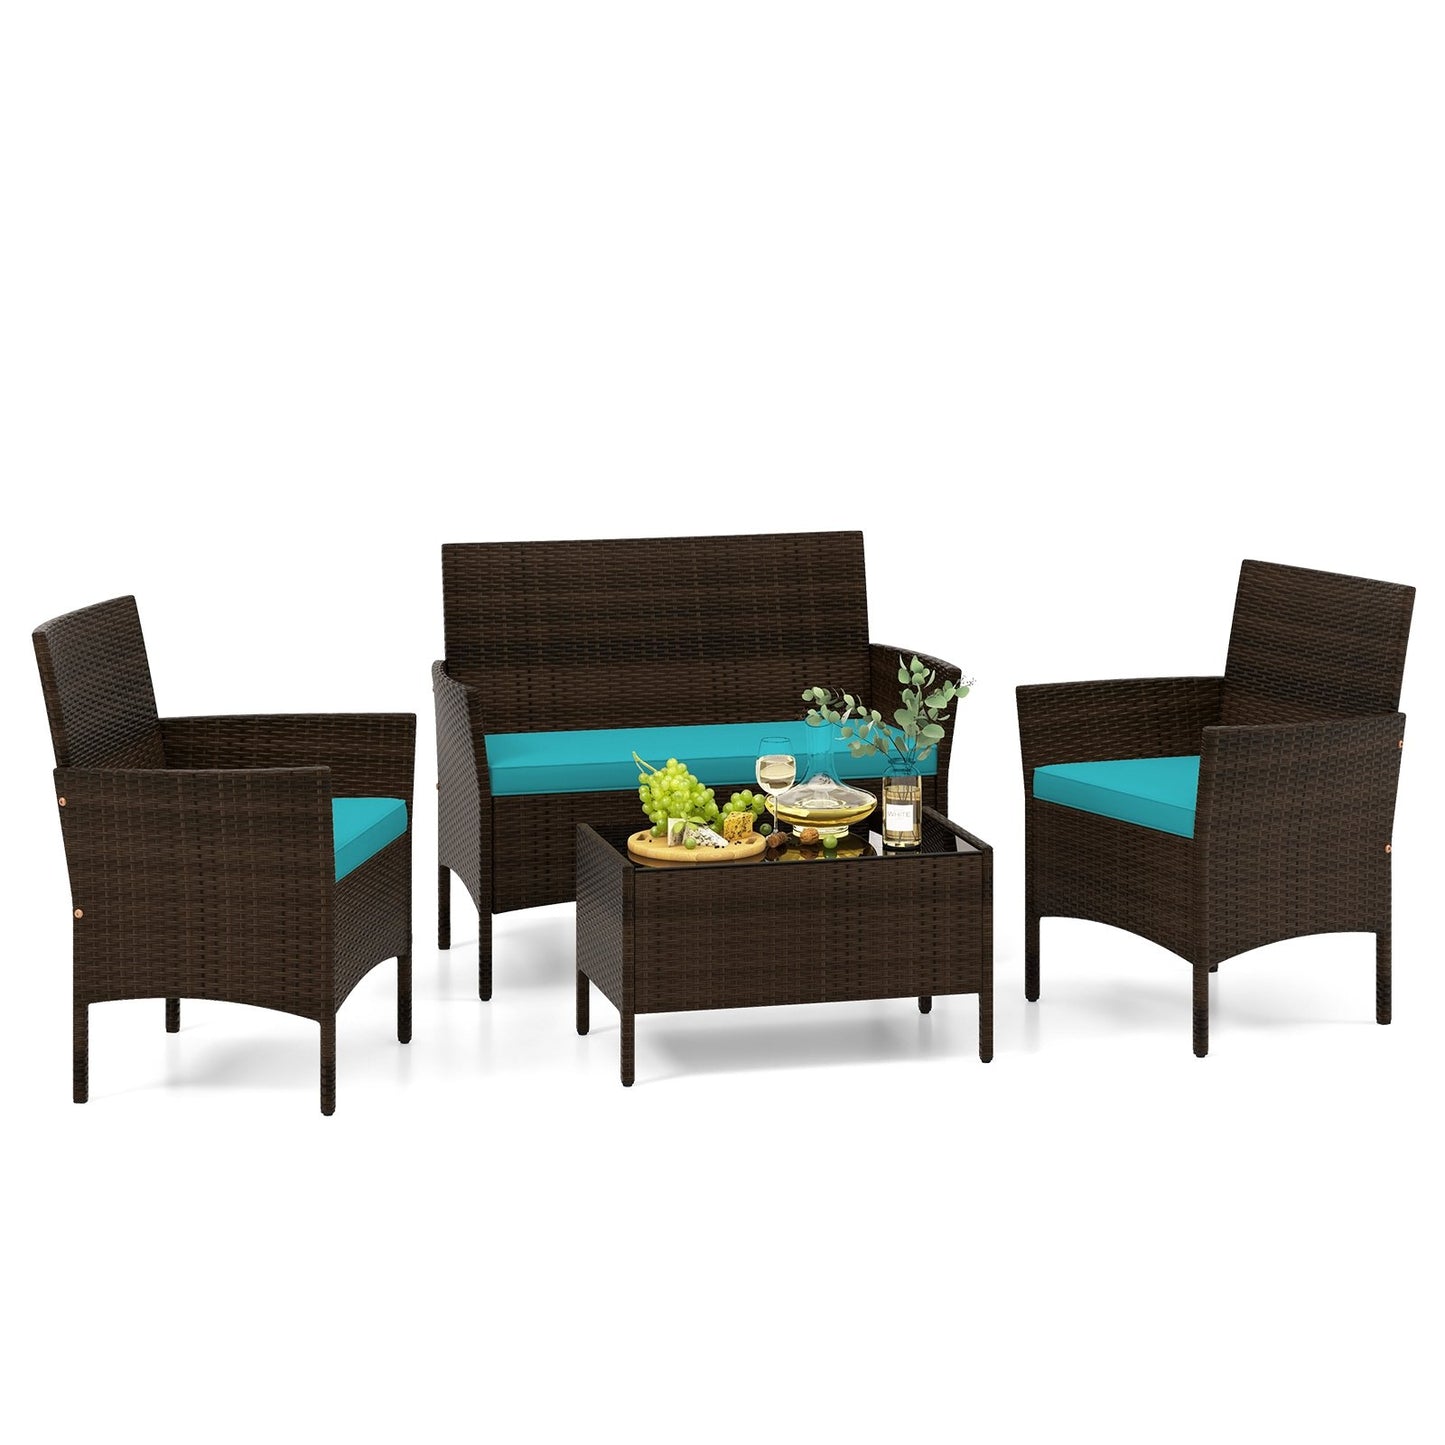 4 Piece Patio Rattan Conversation Set with Cozy Seat Cushions, Turquoise